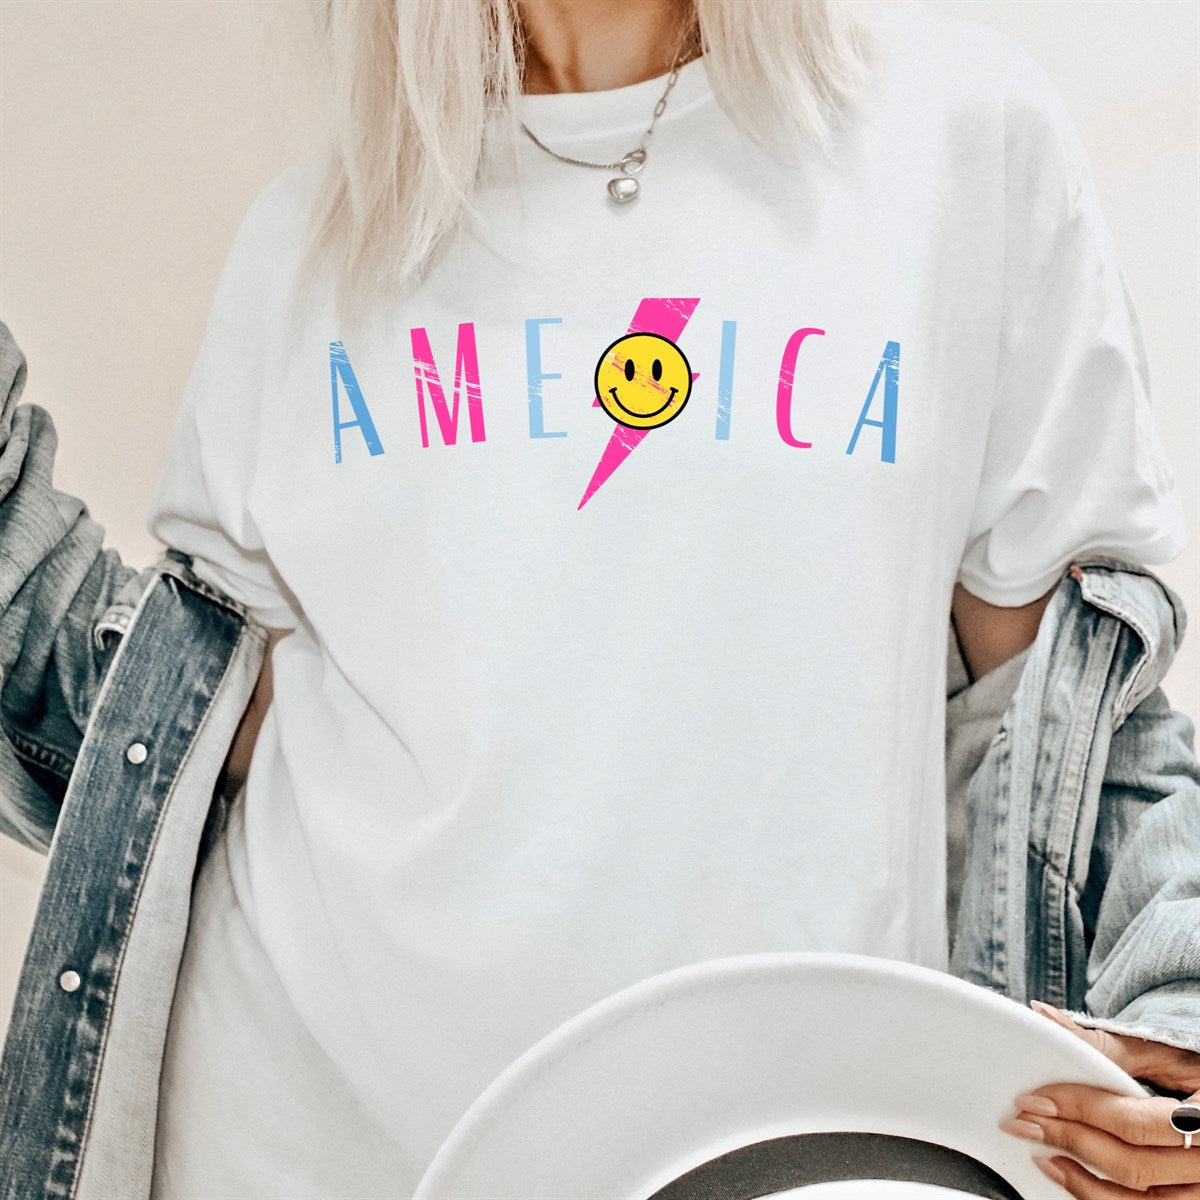 America With Lightning Bolt & Smiley Face Tee